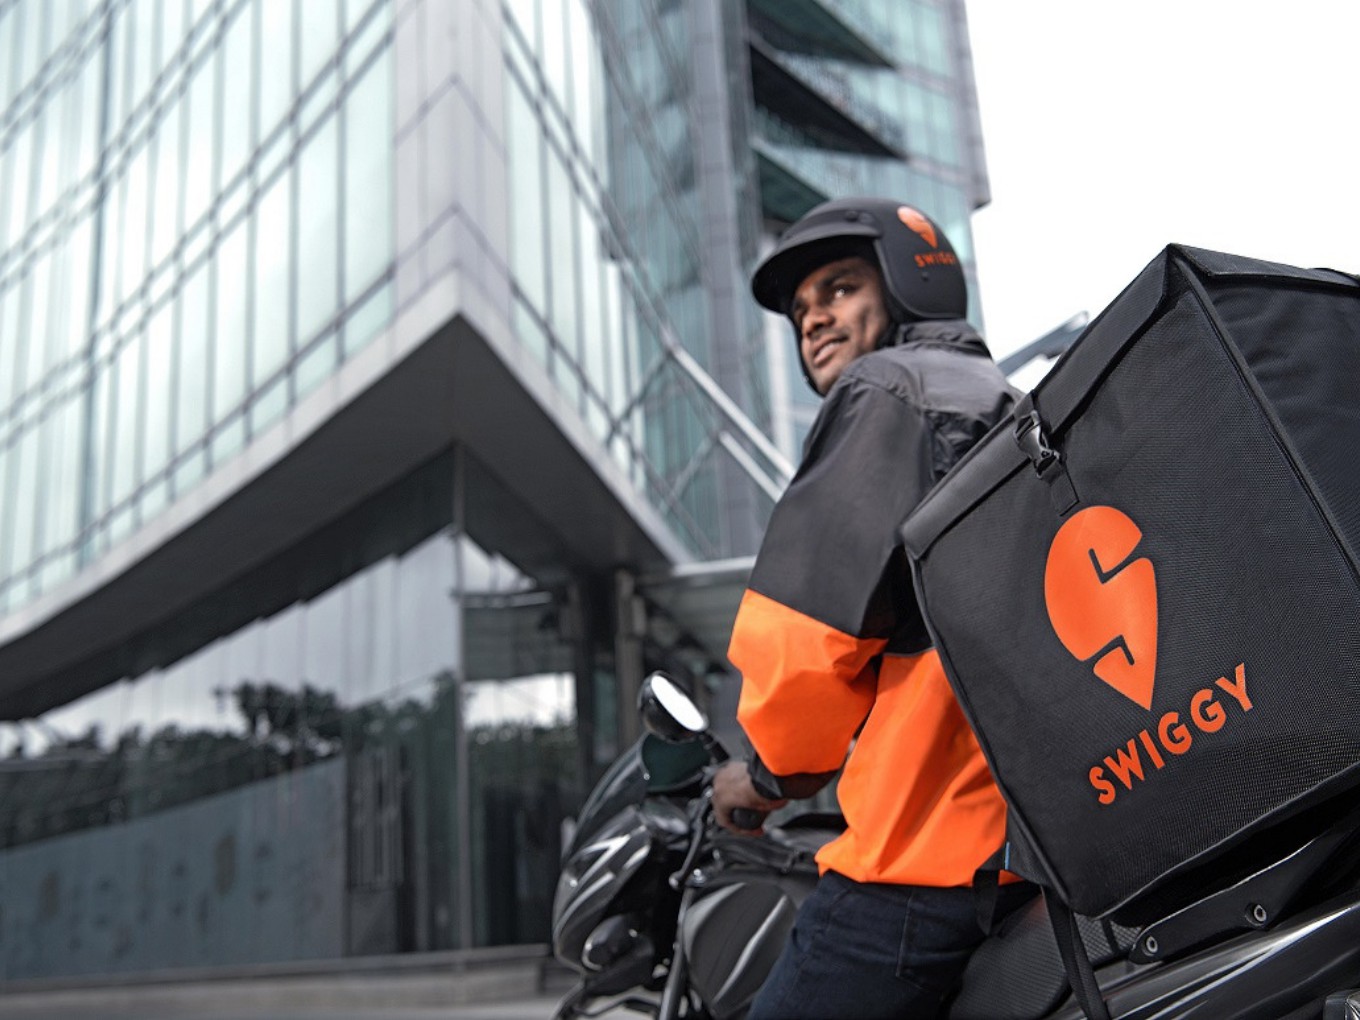 Swiggy Partners With Bounce To Pilot Bike Taxi Deliveries